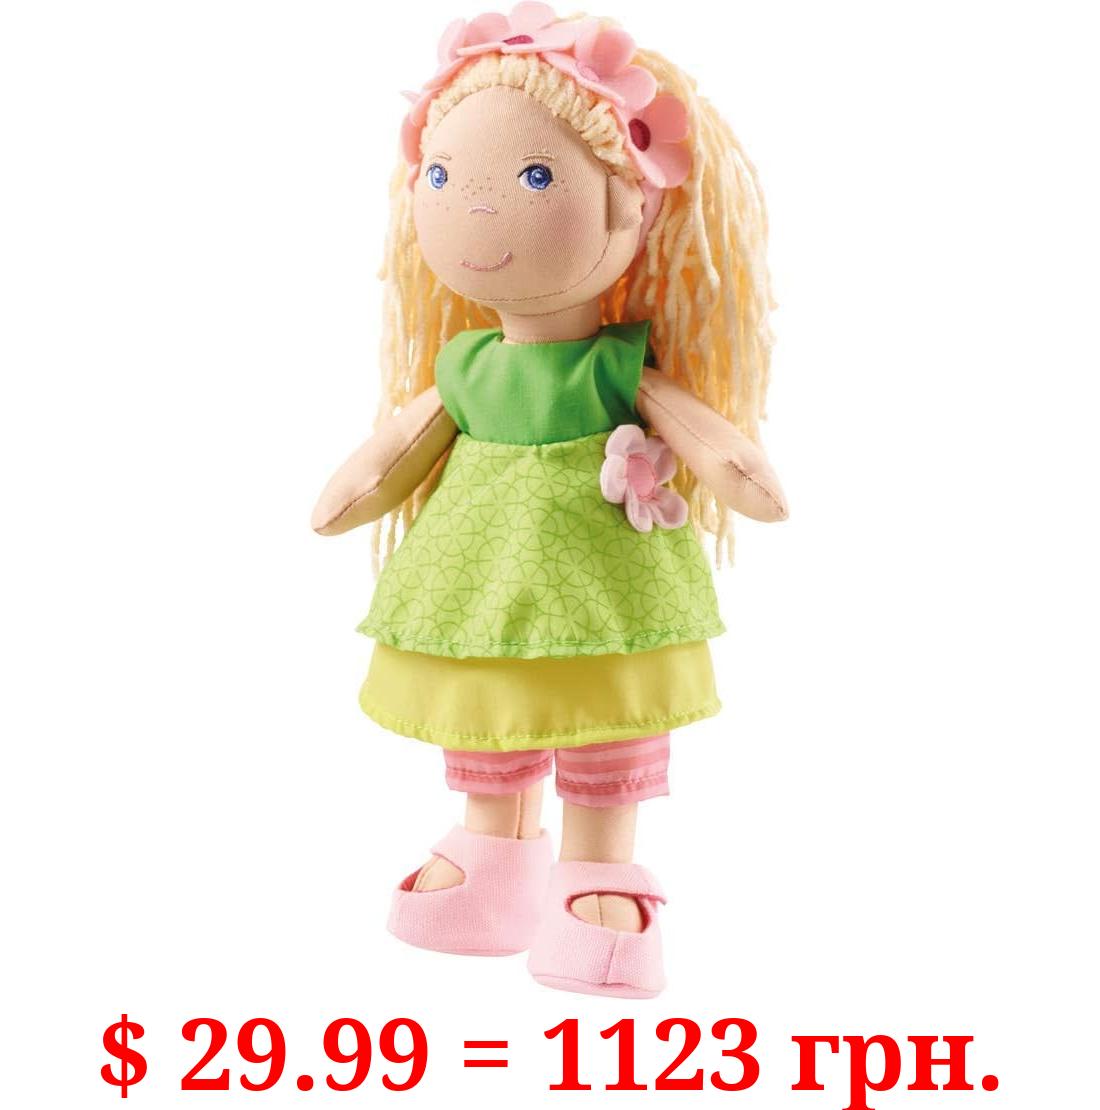 HABA Mali 12" Soft Doll with Blonde Hair, Blue Eyes and Embroidered Face for Ages 18 Months and Up